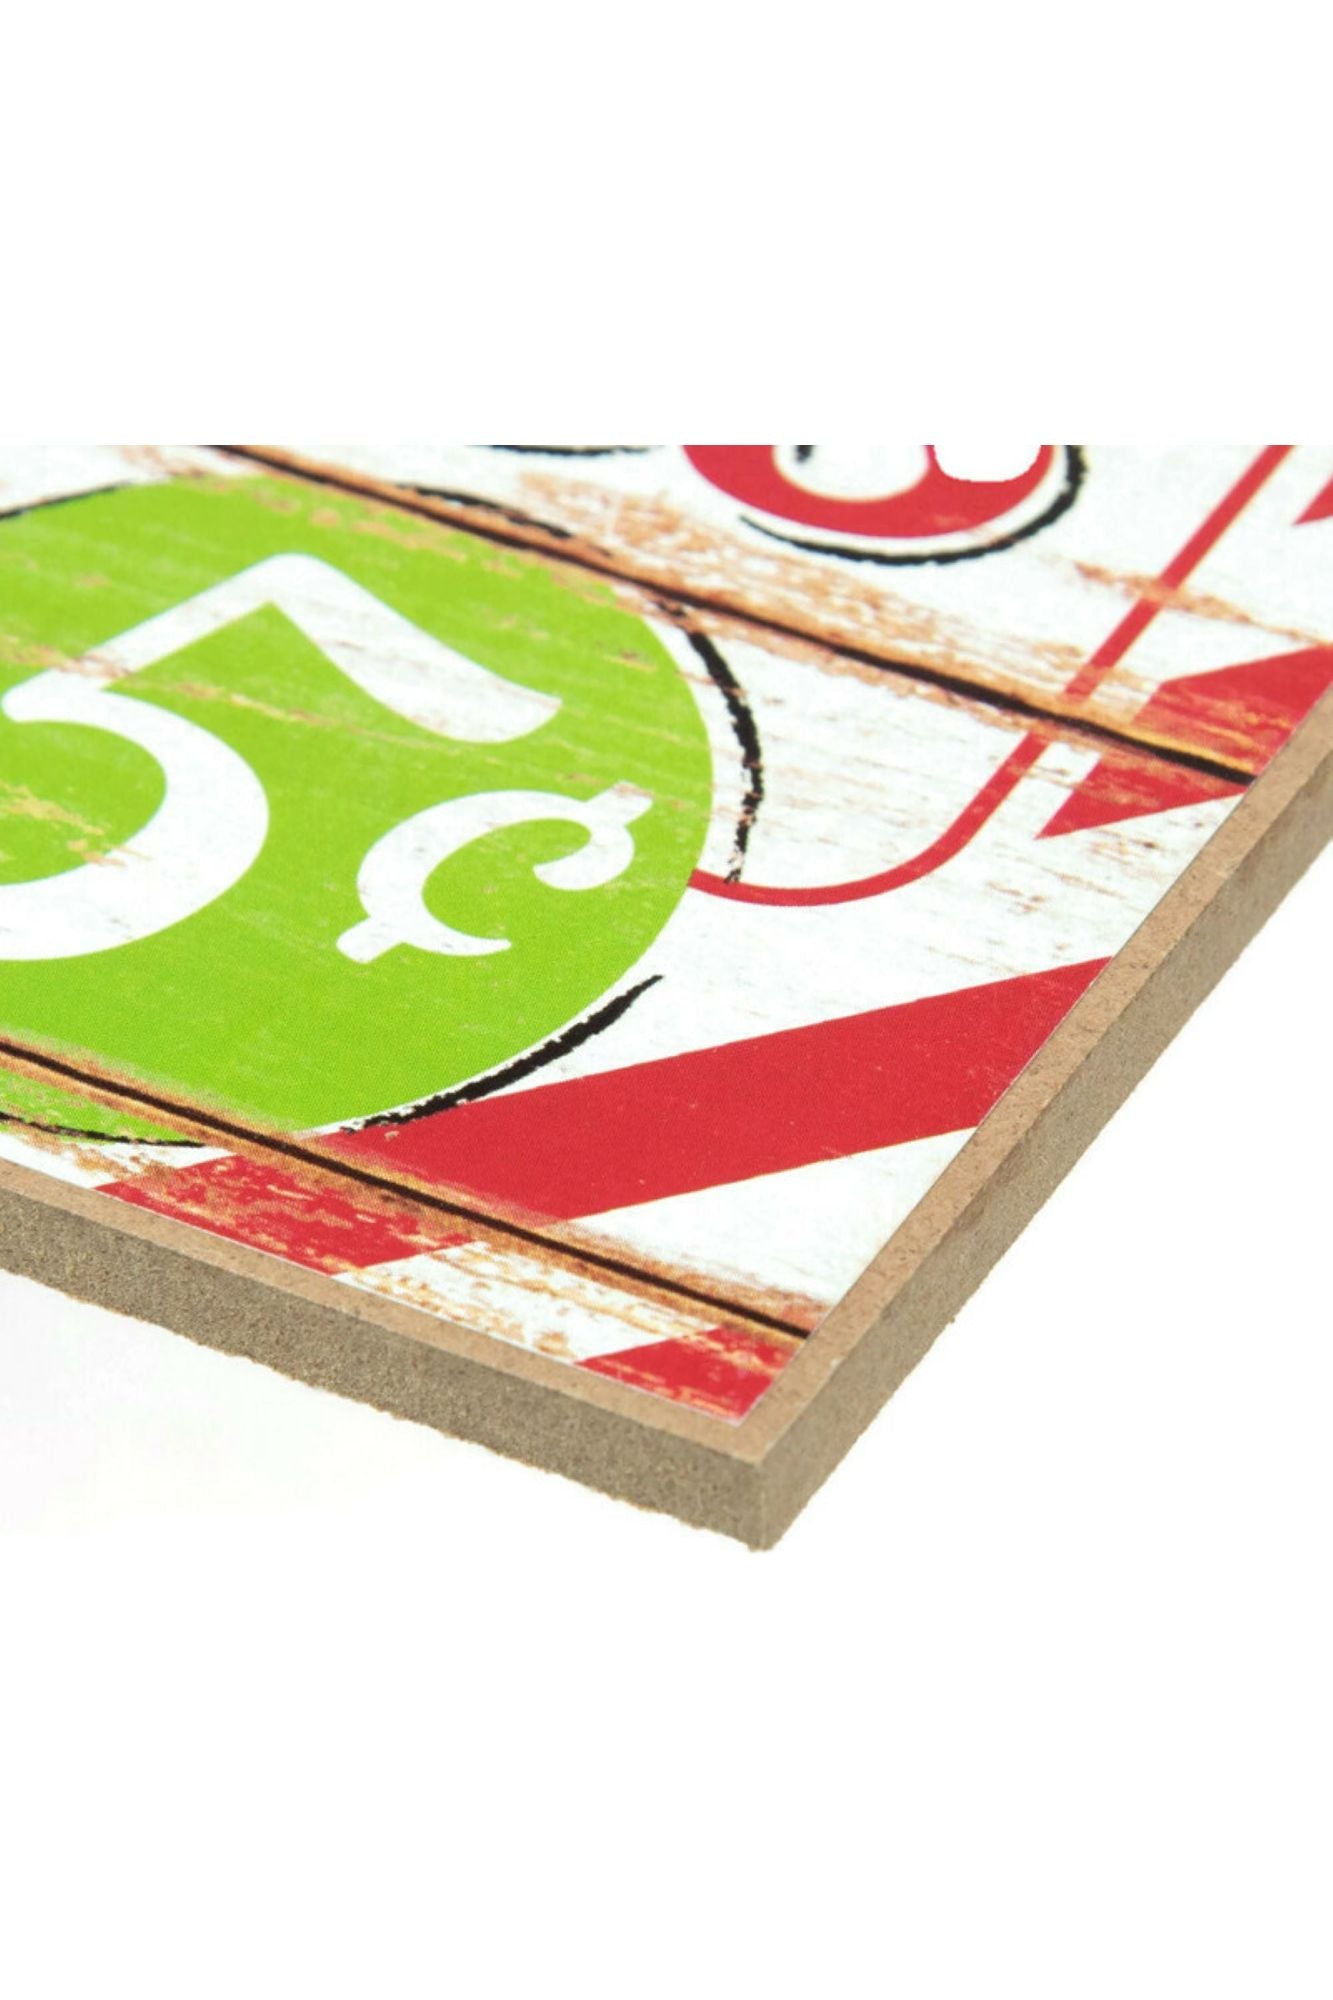 Shop For 12" Wooden Sign: Old Fashion Candy Canes AP8171